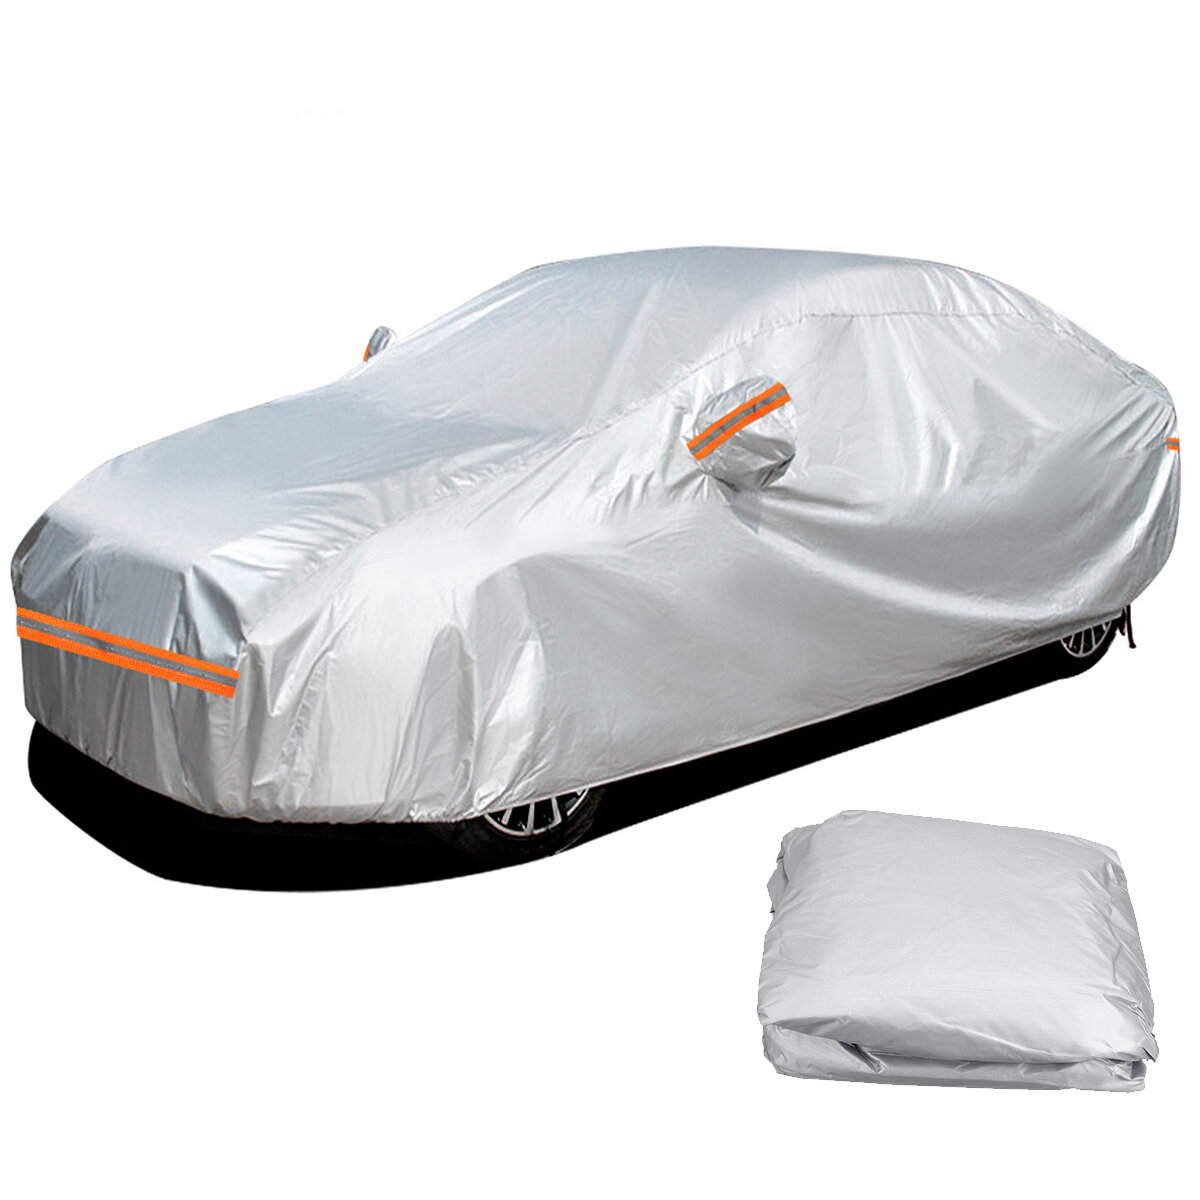 Full Car Sedan Cover Outdoor Waterproof Dust Scratch UV Protection Size S-XXL 